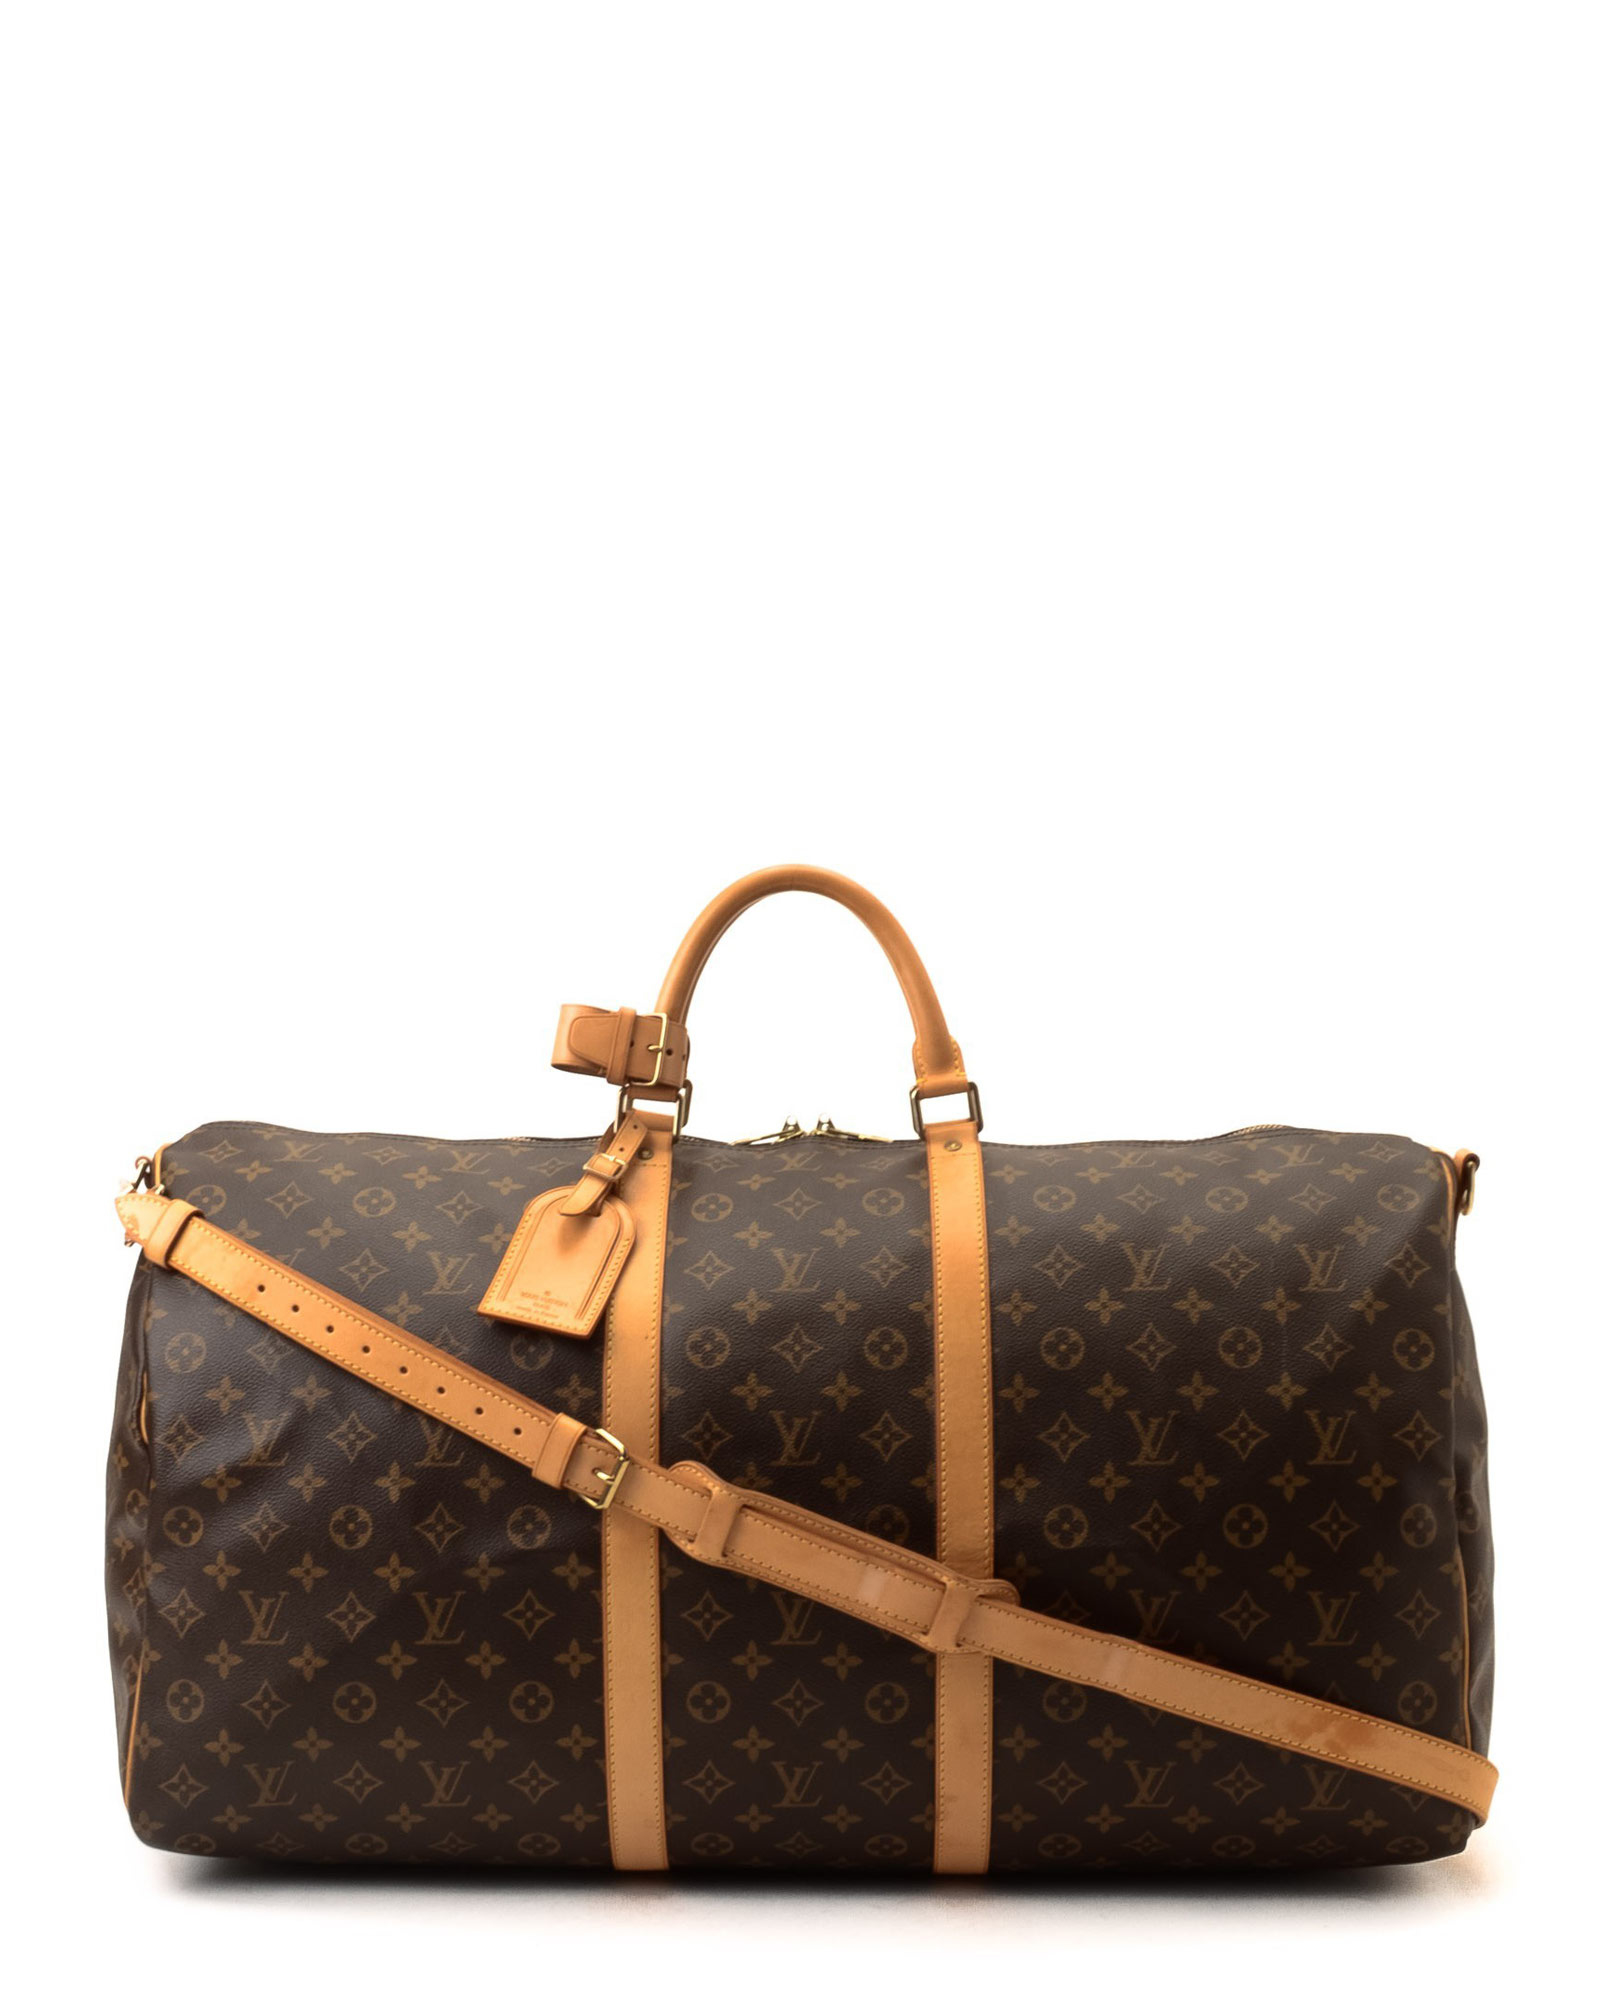 Recycled Louis Vuitton Bags | IQS Executive